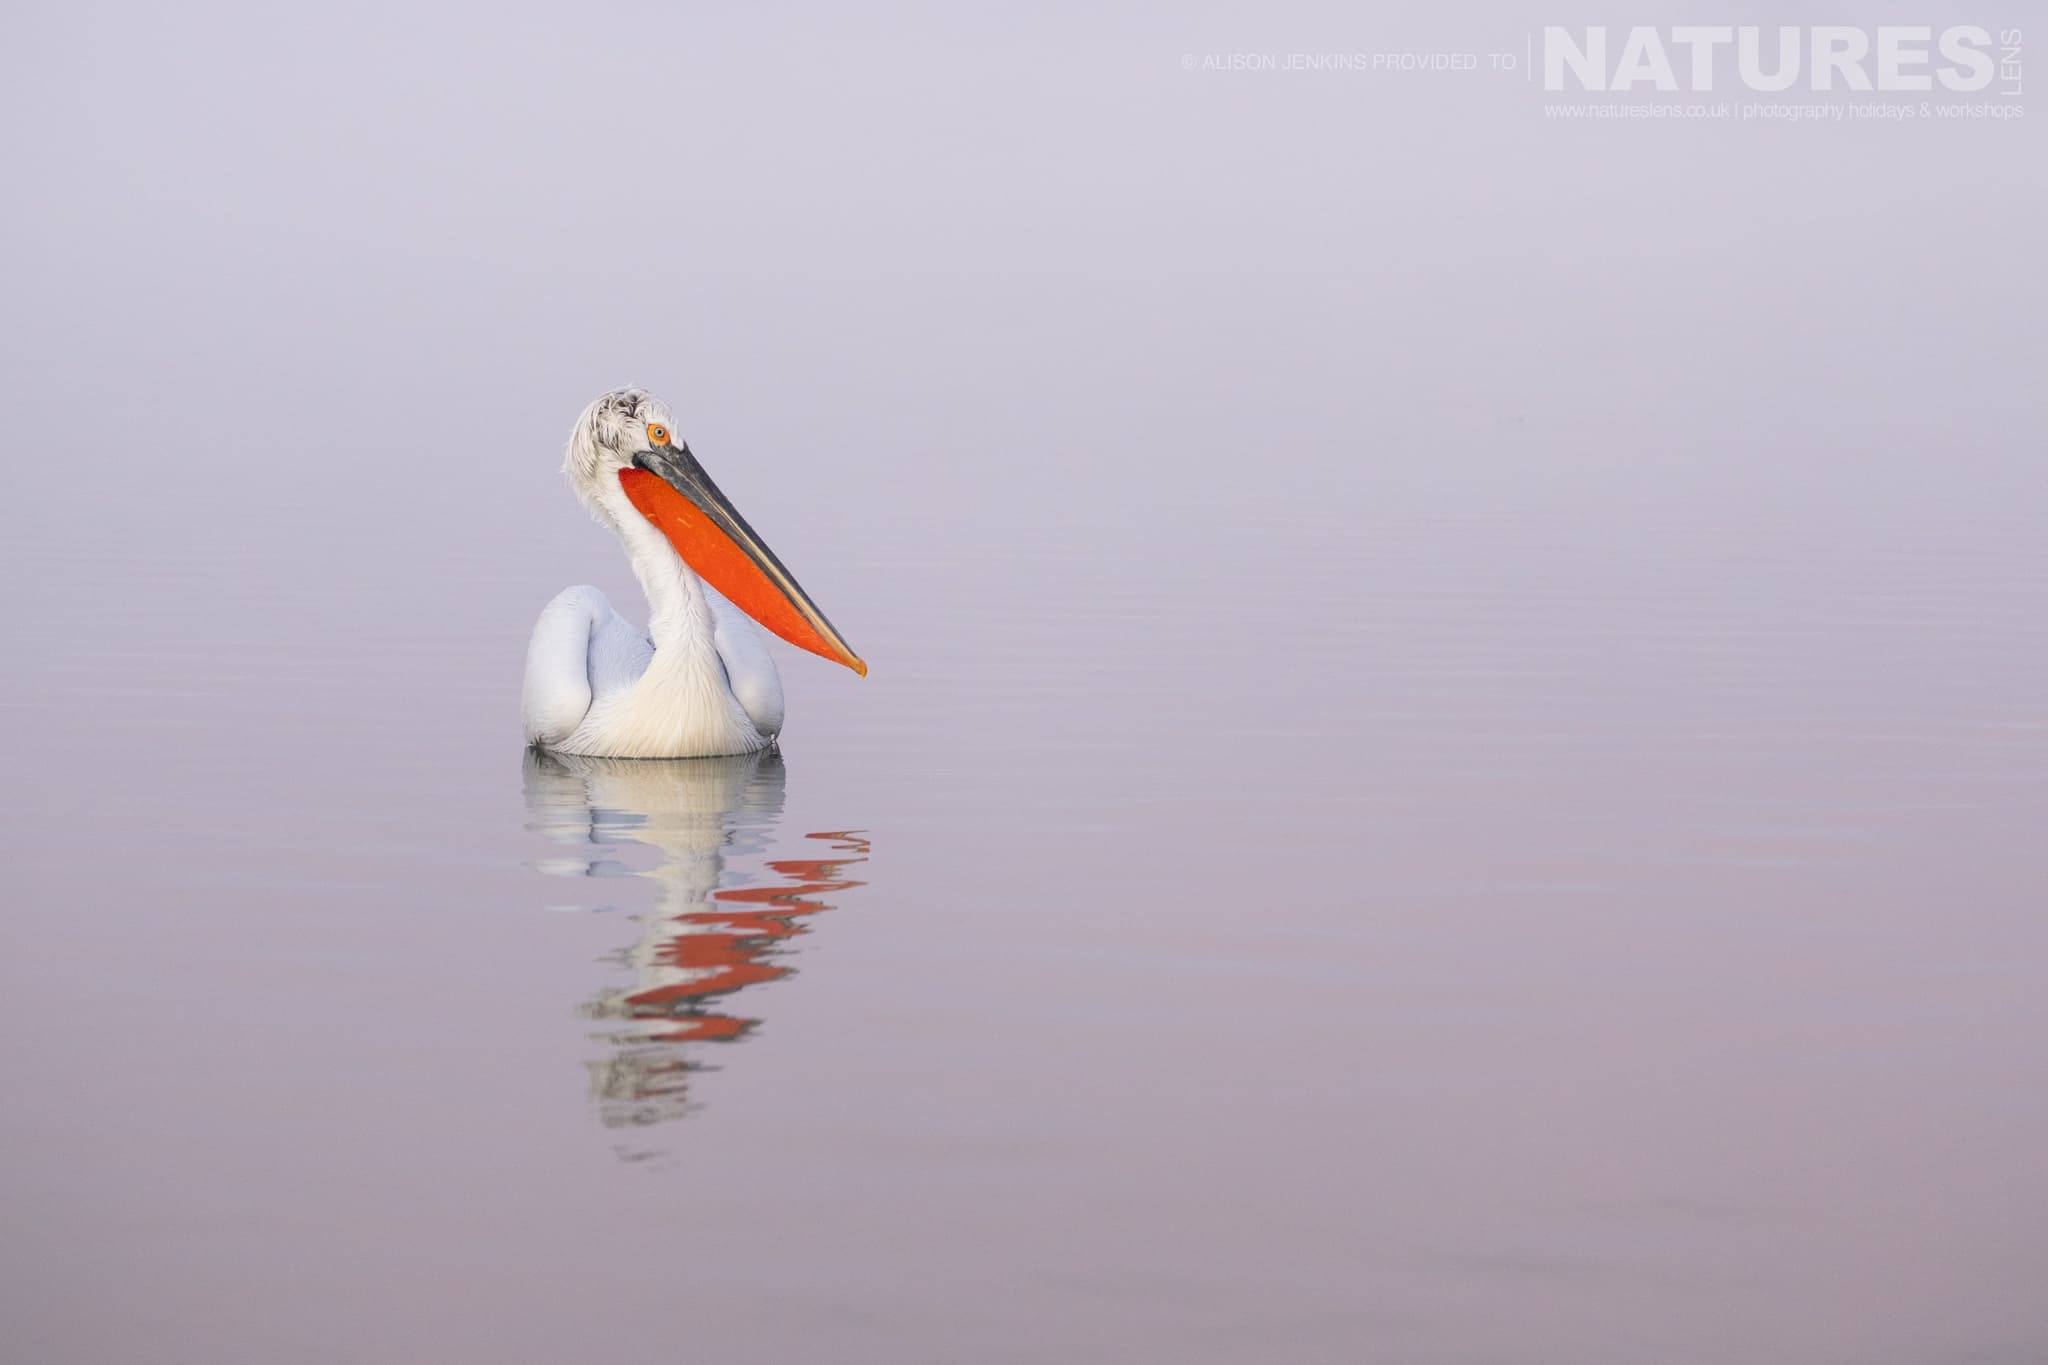 A Photograph Which Demonstrates Ethical Photography Whilst Respecting The Pelicans Of Lake Kerkini